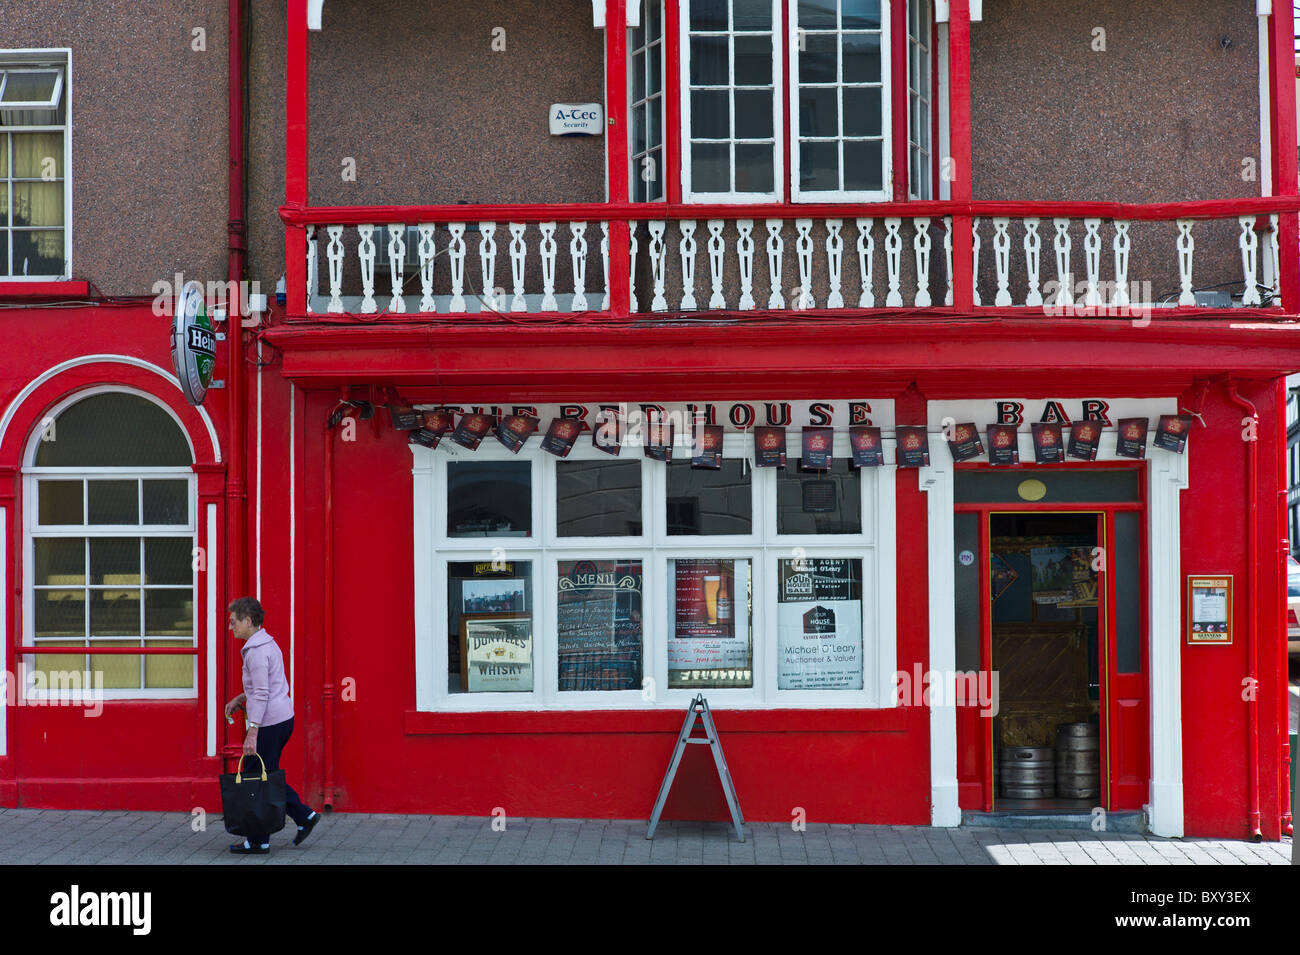 The Red House Bar public bar in Chapel Street, Lismore, County Waterford, Ireland Stock Photo